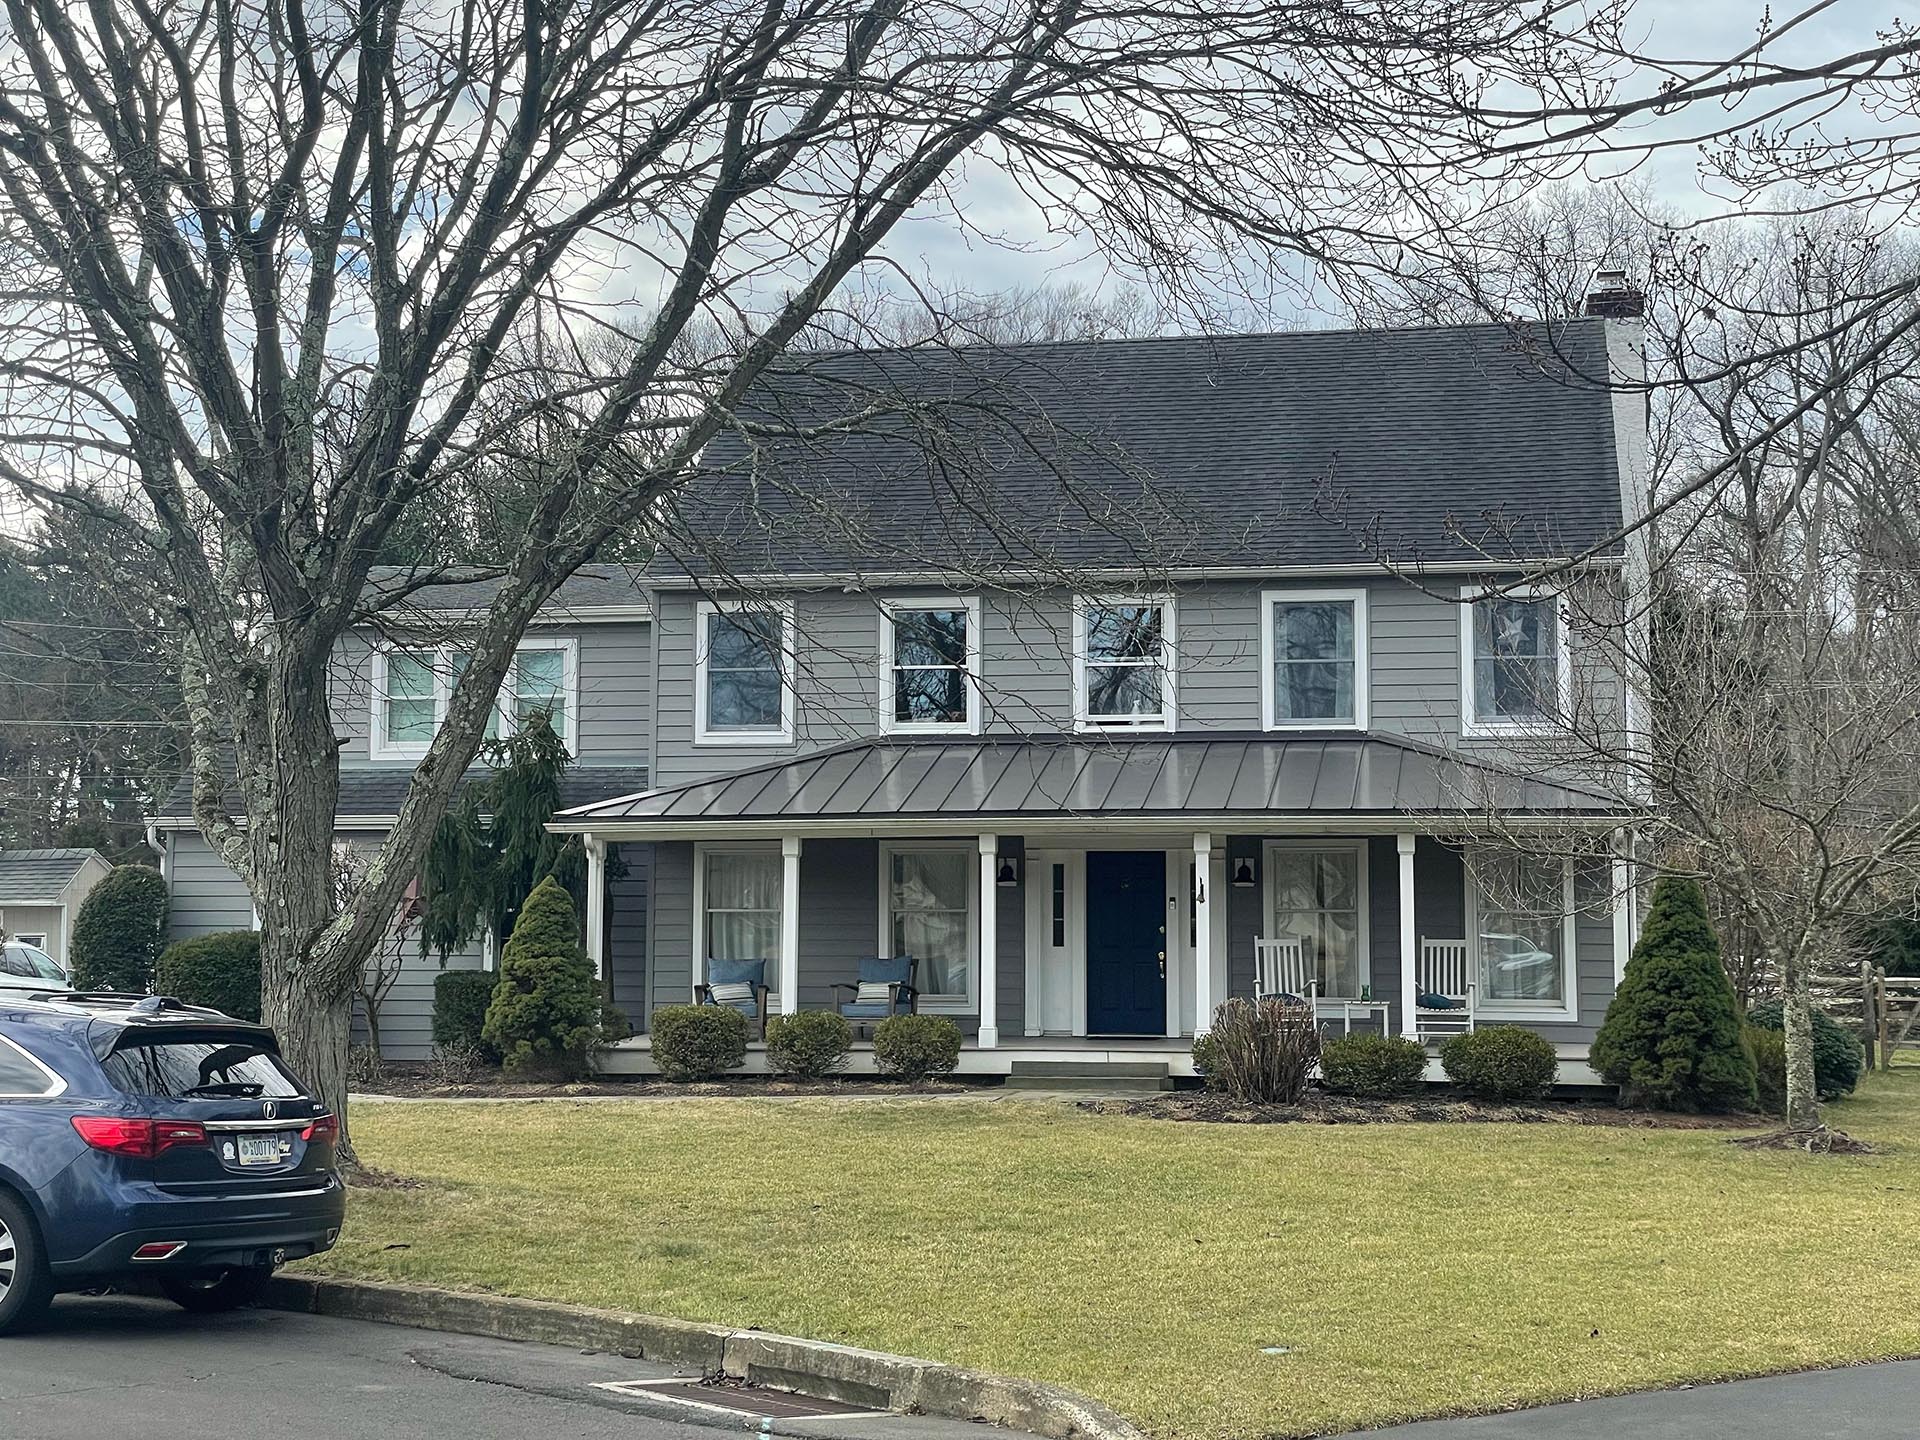 Large PA home after exterior renovation